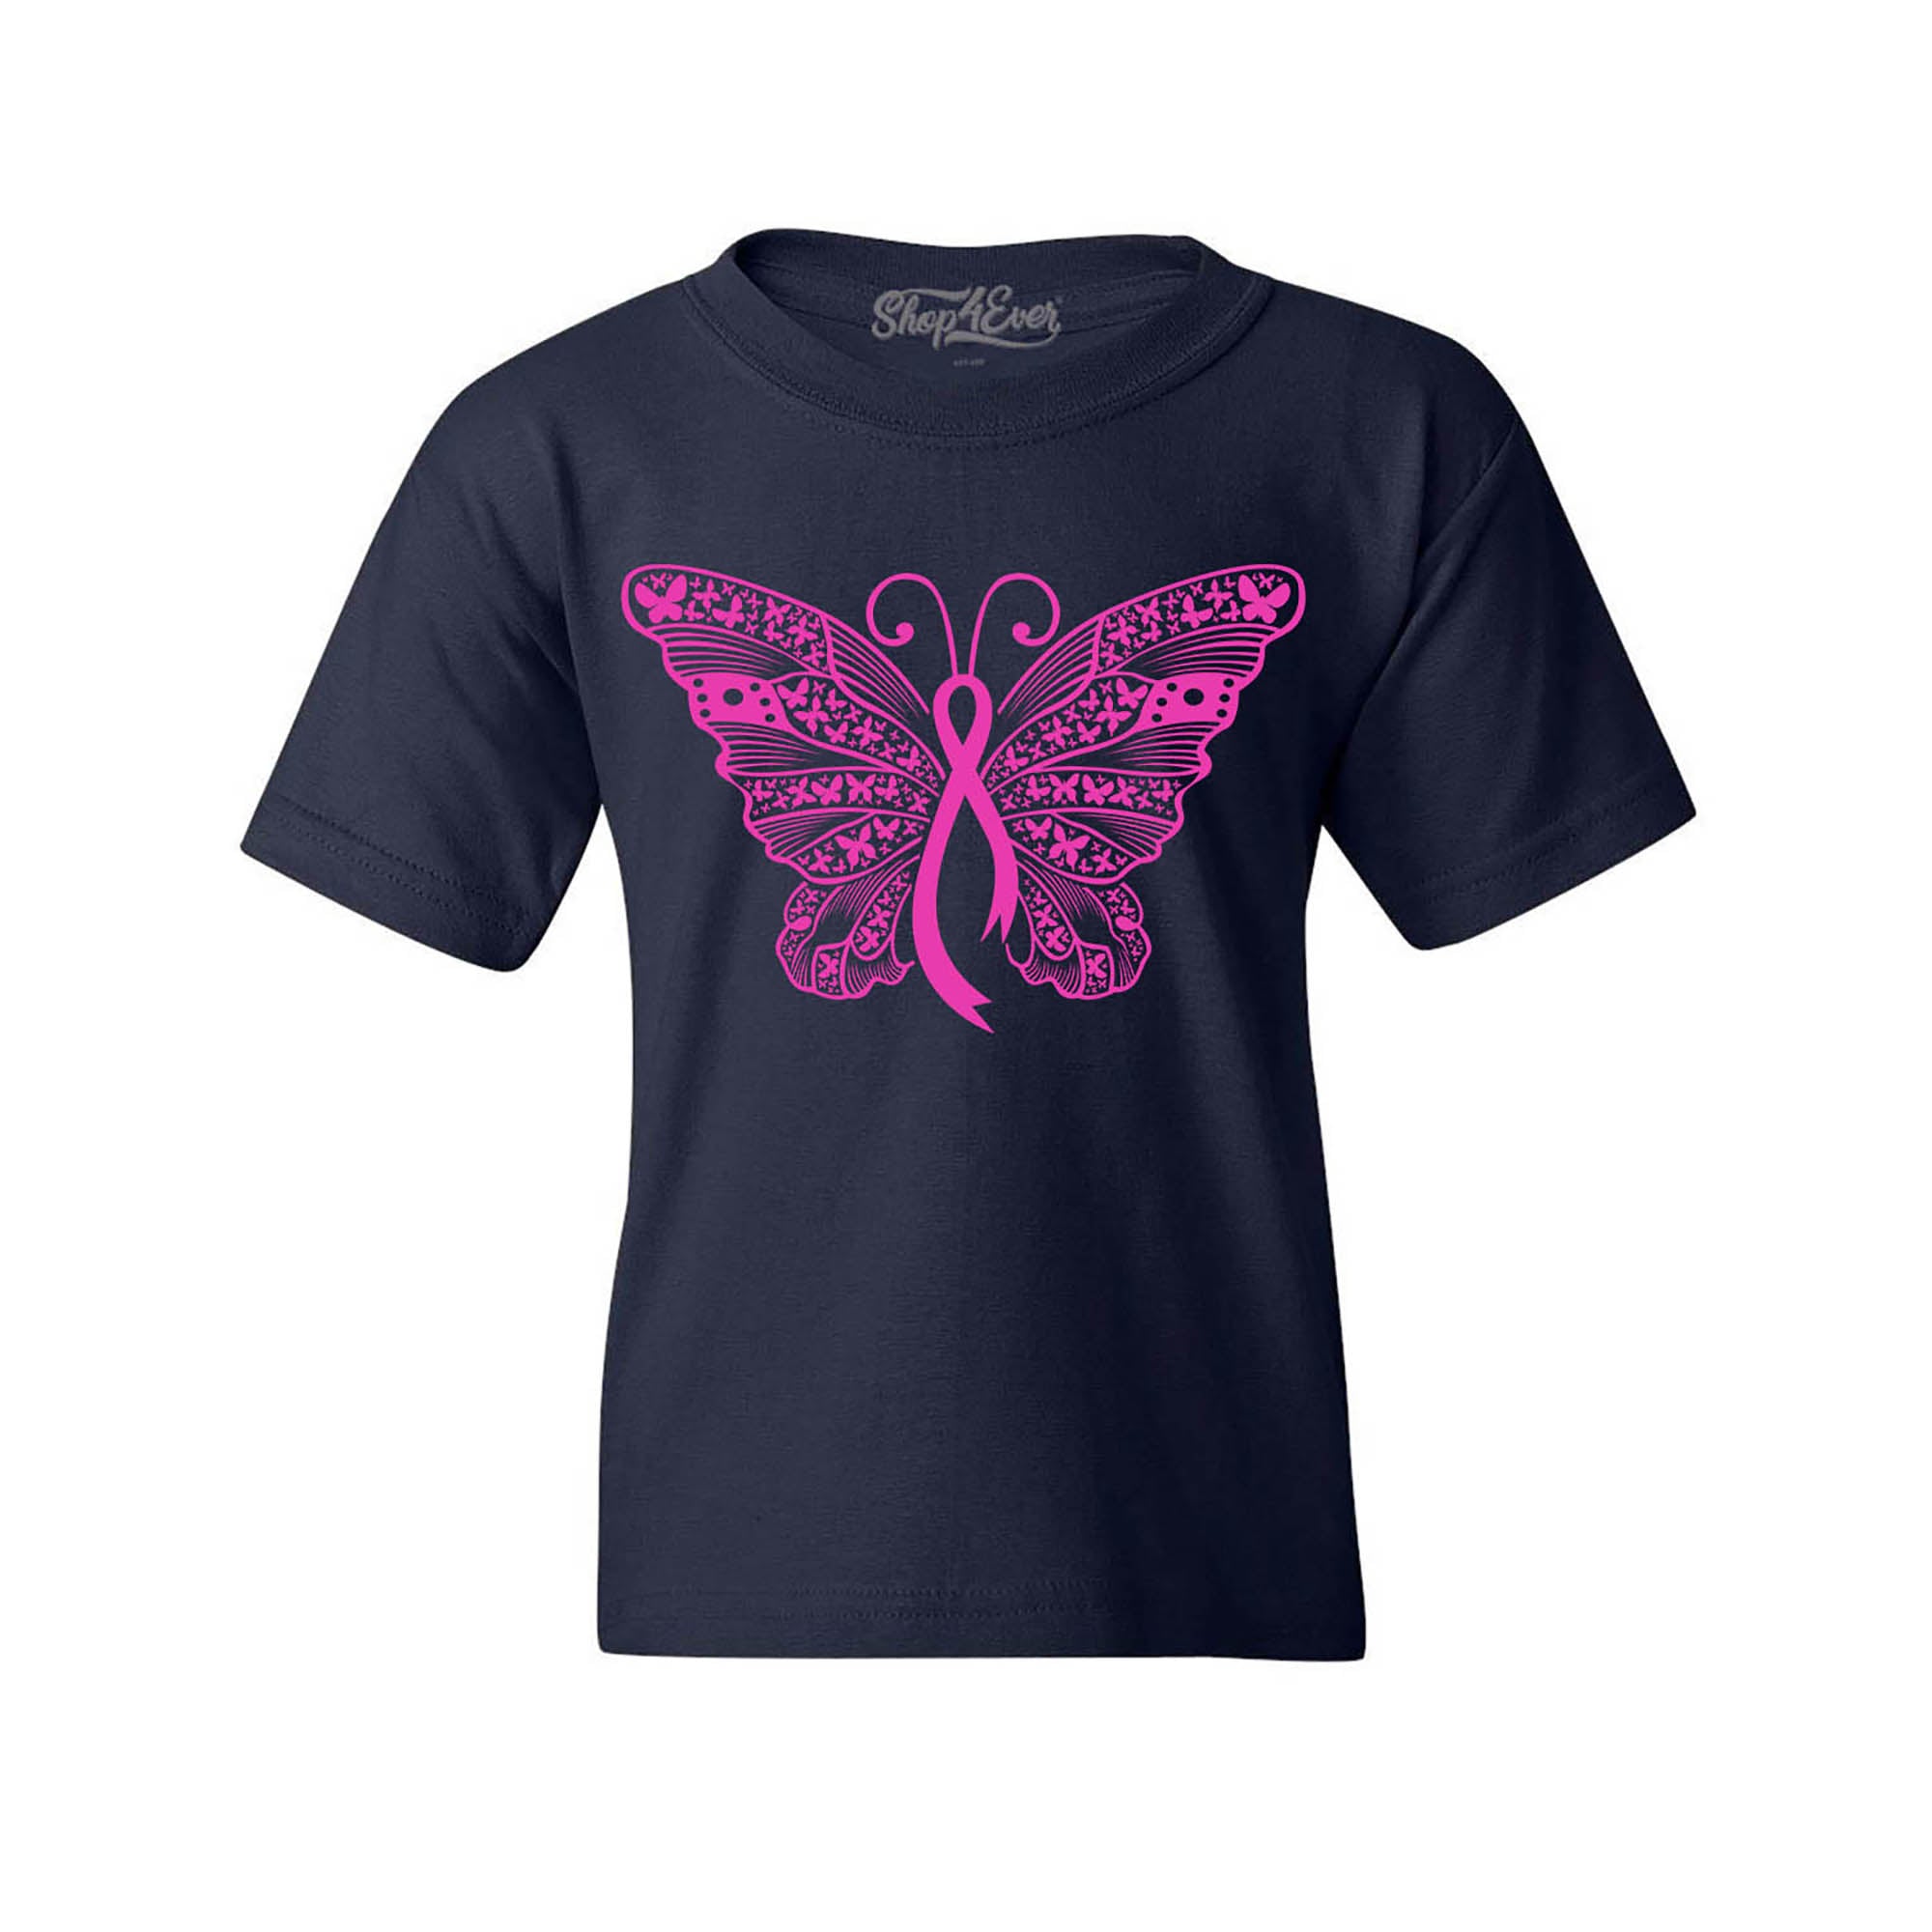 Pink Ribbon Butterfly Breast Cancer Awareness Youth's T-Shirt